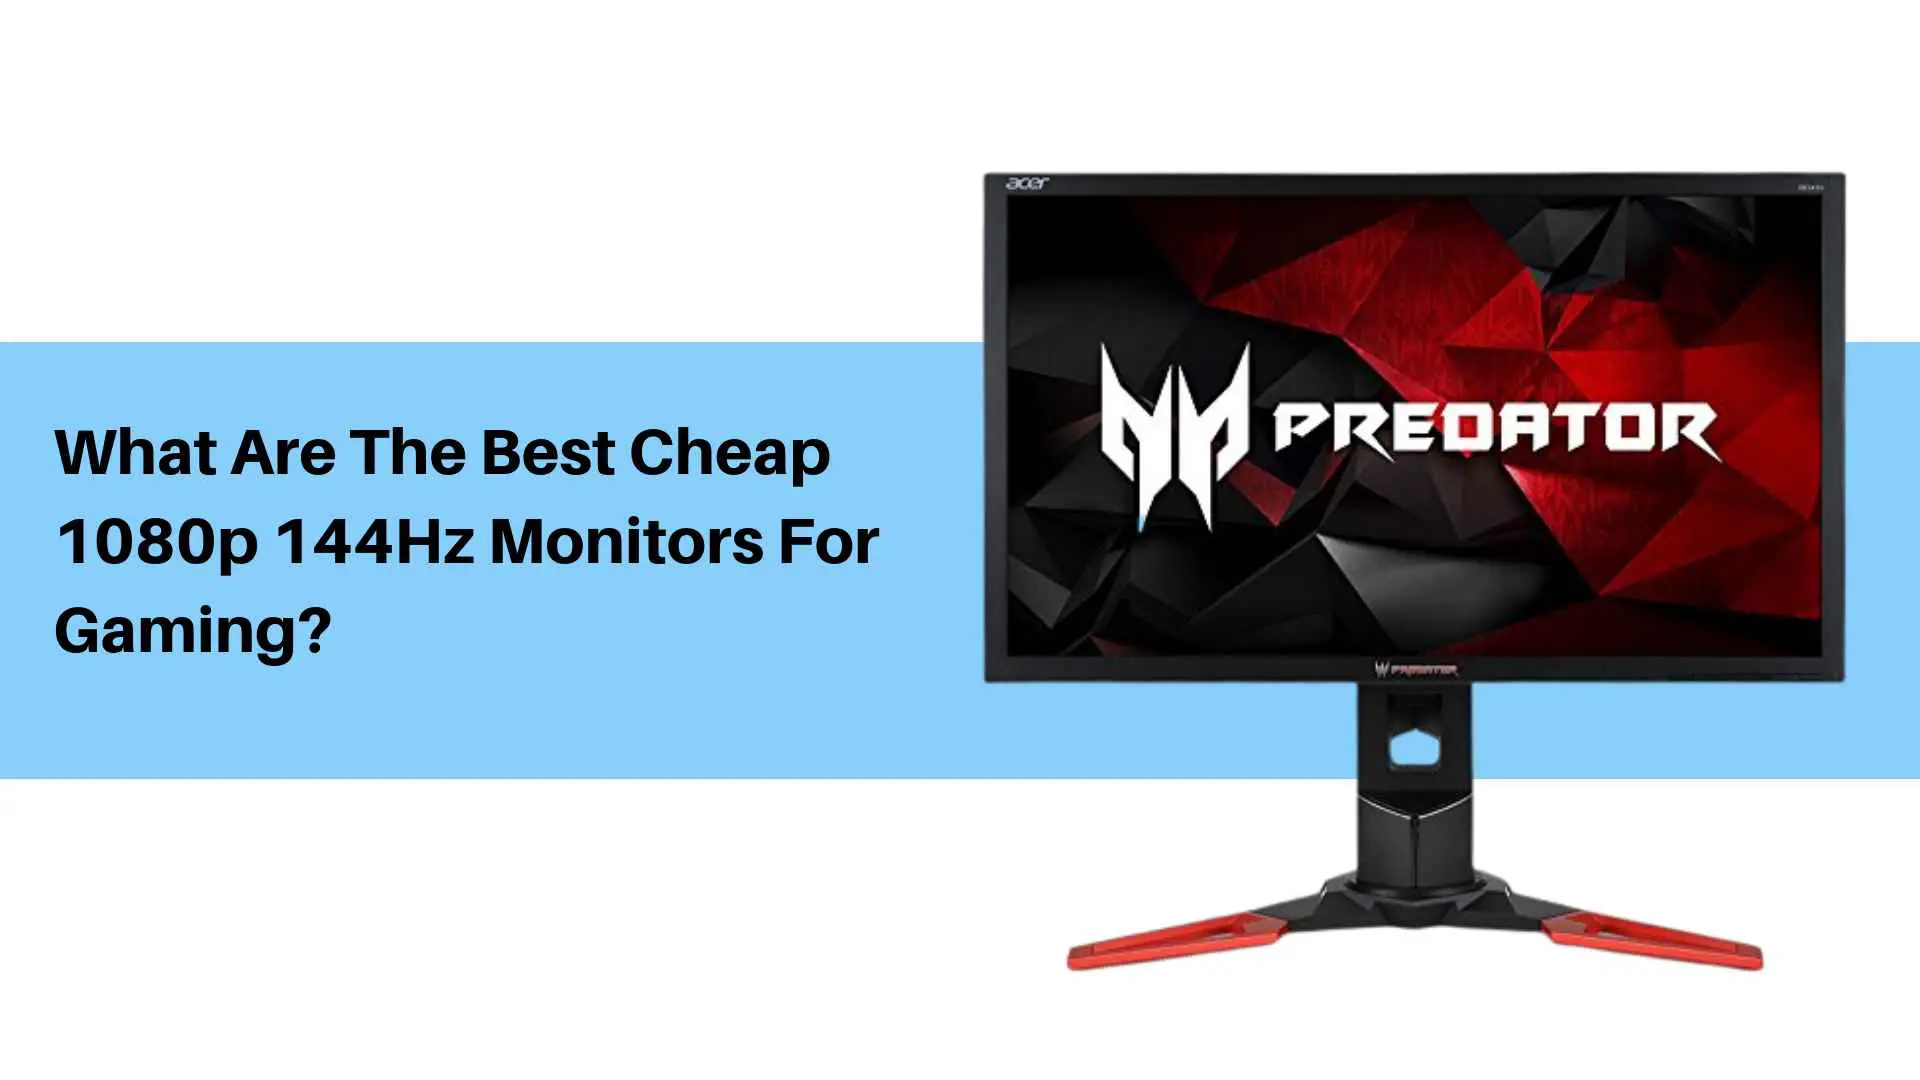 Best Cheap 1080p 144Hz Monitors For Gaming